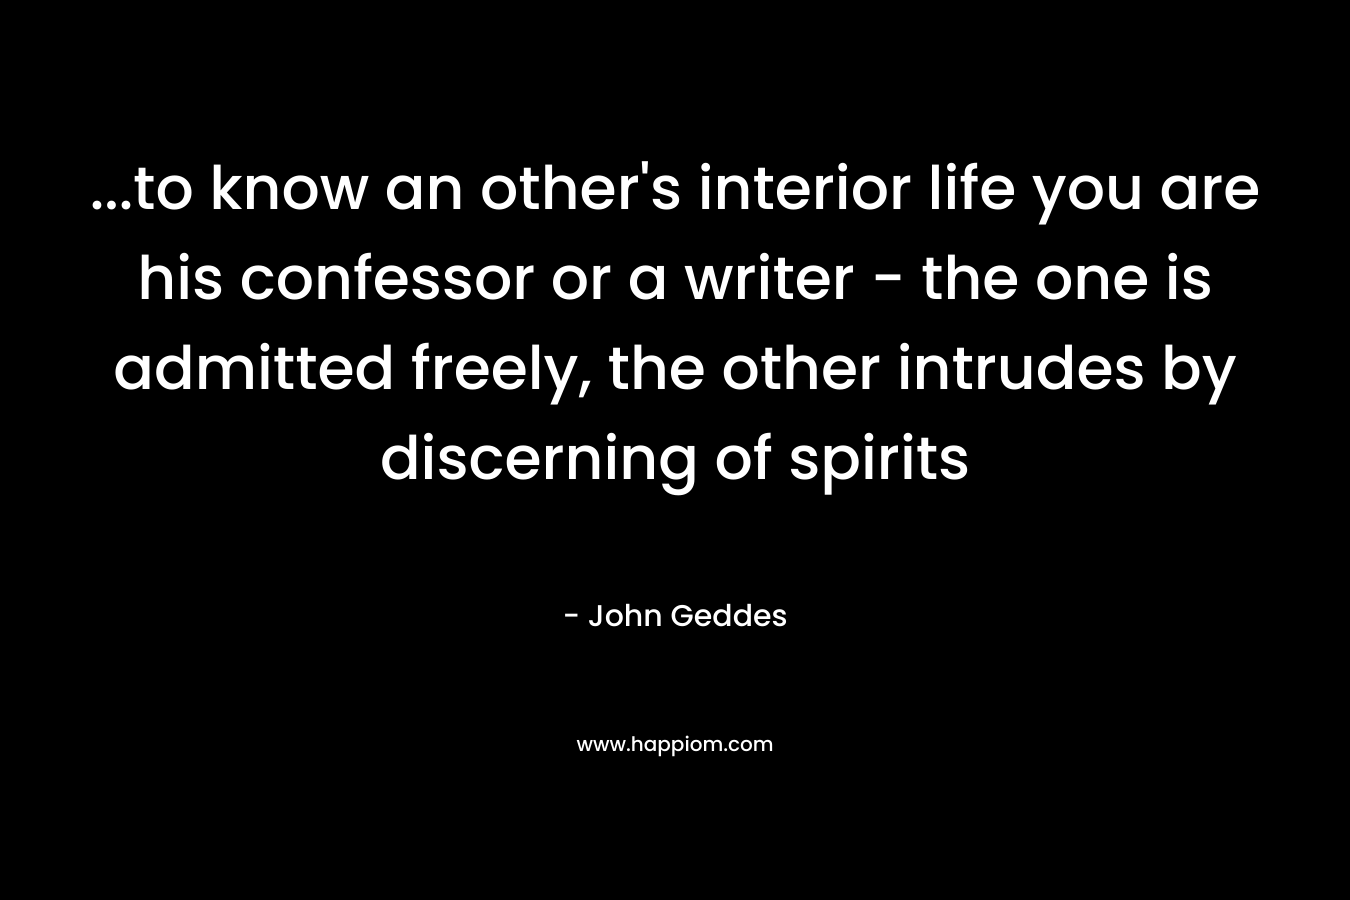 ...to know an other's interior life you are his confessor or a writer - the one is admitted freely, the other intrudes by discerning of spirits 